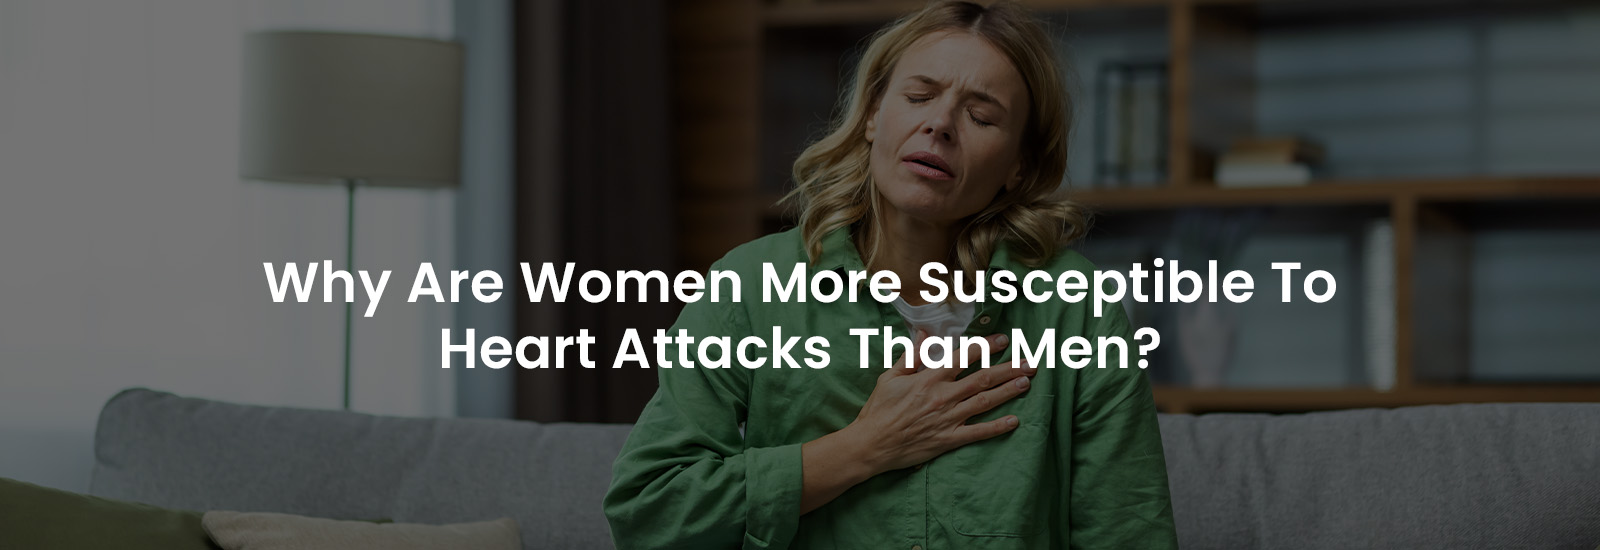 Why Are Women More Susceptible to Heart Attacks Than Men? | Banner Image